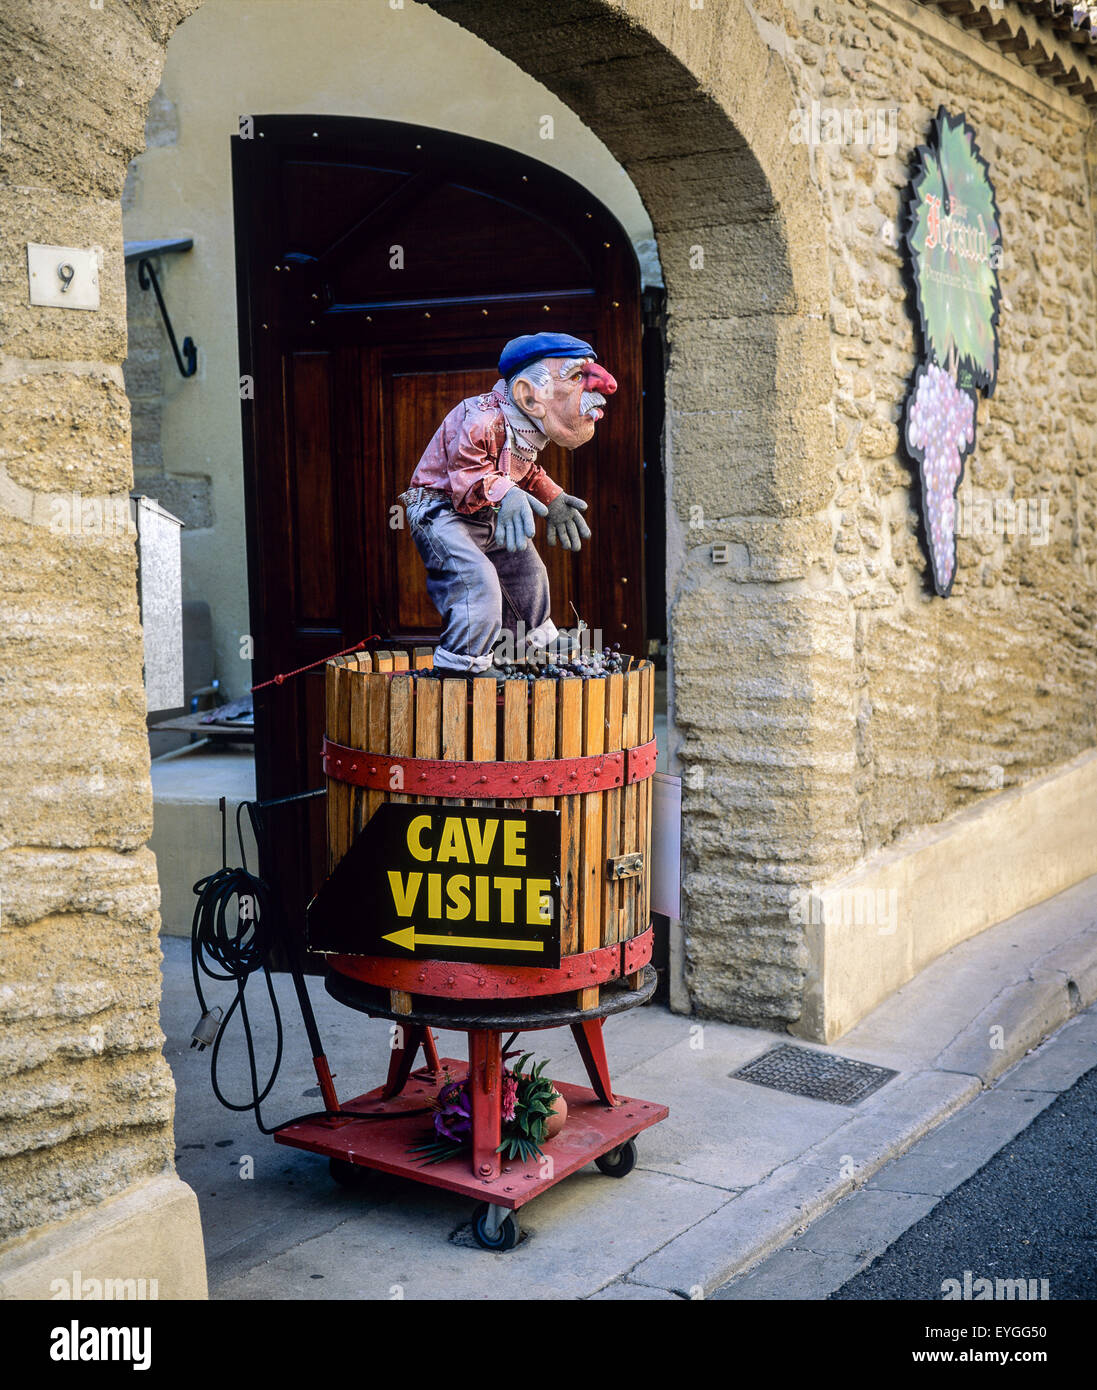 Wine grower cellar's sign, automaton treading grapes by feet, Châteauneuf-du-Pape, Vaucluse, Provence, France, Europe Stock Photo